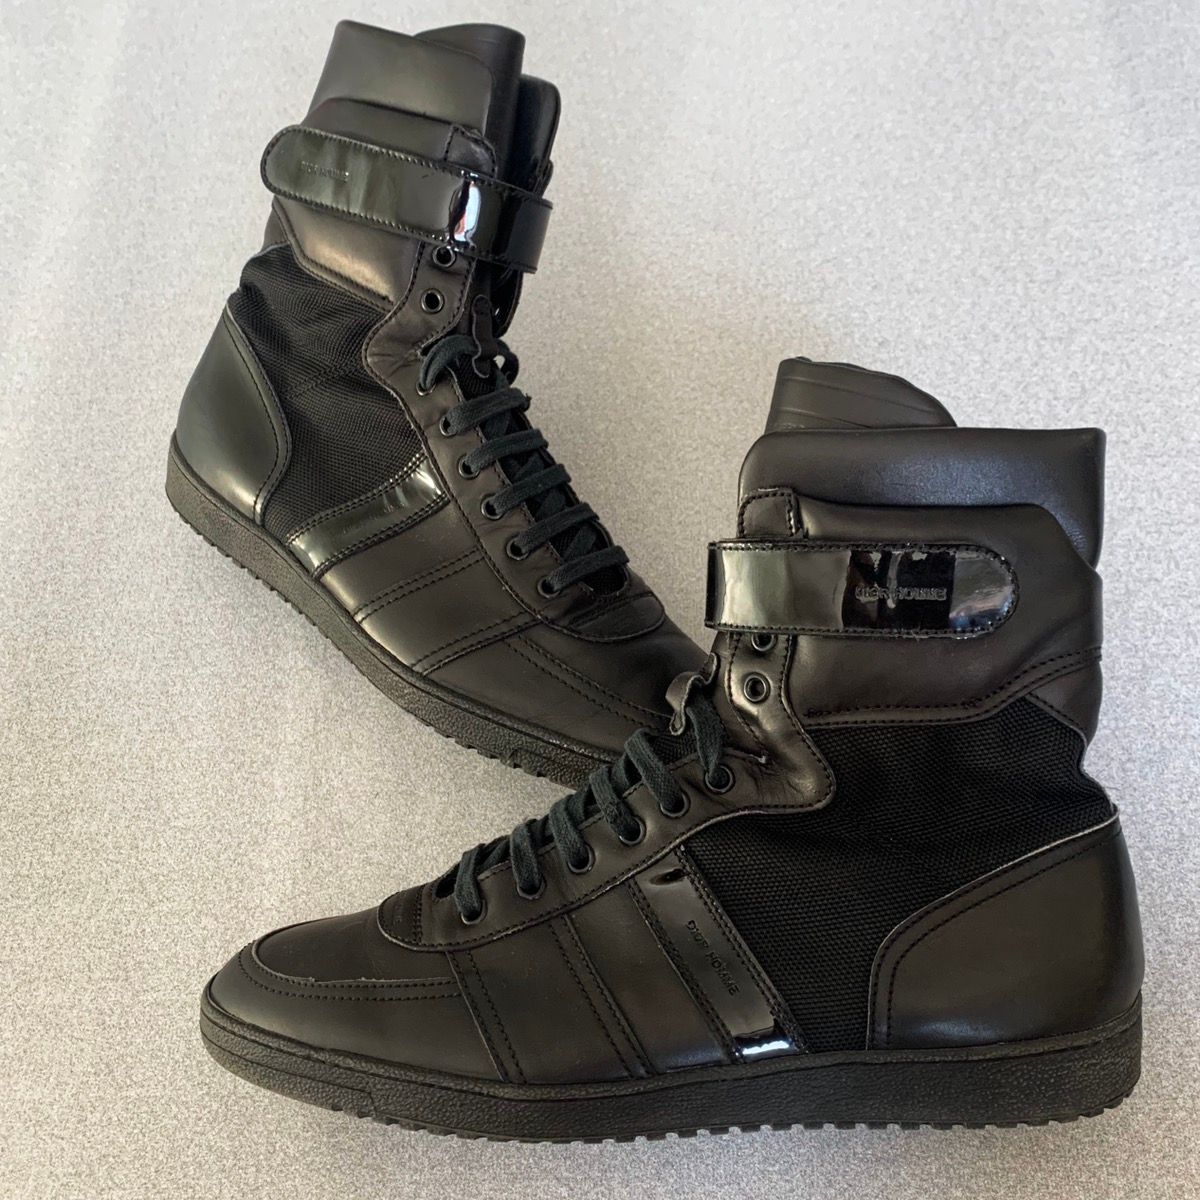 Dior Dior Homme B50 sneakers aw07 by Hedi Slimane | Grailed